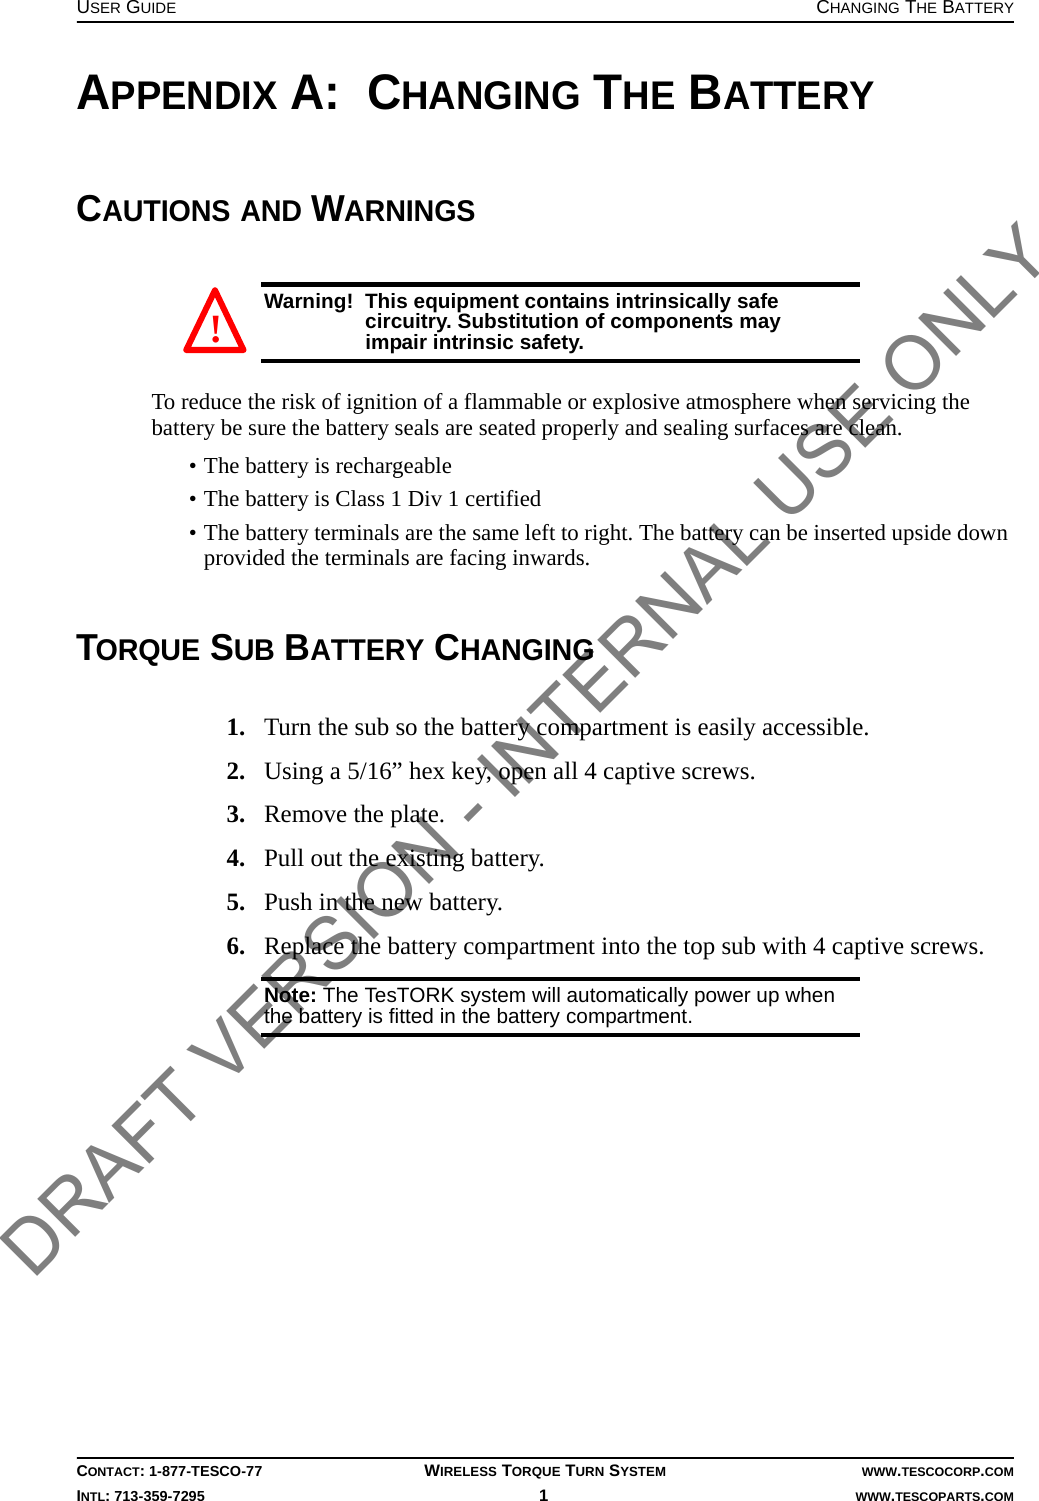 USER GUIDE CHANGING THE BATTERYCONTACT: 1-877-TESCO-77 WIRELESS TORQUE TURN SYSTEM WWW.TESCOCORP.COMINTL: 713-359-7295 1   WWW.TESCOPARTS.COMAPPENDIX A:  CHANGING THE BATTERYCAUTIONS AND WARNINGSWarning!  This equipment contains intrinsically safe circuitry. Substitution of components may impair intrinsic safety.To reduce the risk of ignition of a flammable or explosive atmosphere when servicing the battery be sure the battery seals are seated properly and sealing surfaces are clean.• The battery is rechargeable• The battery is Class 1 Div 1 certified• The battery terminals are the same left to right. The battery can be inserted upside down provided the terminals are facing inwards.TORQUE SUB BATTERY CHANGING1. Turn the sub so the battery compartment is easily accessible.2. Using a 5/16” hex key, open all 4 captive screws.3. Remove the plate.4. Pull out the existing battery.5. Push in the new battery.6. Replace the battery compartment into the top sub with 4 captive screws.Note: The TesTORK system will automatically power up when the battery is fitted in the battery compartment.! DRAFT VERSION - INTERNAL USE ONLY